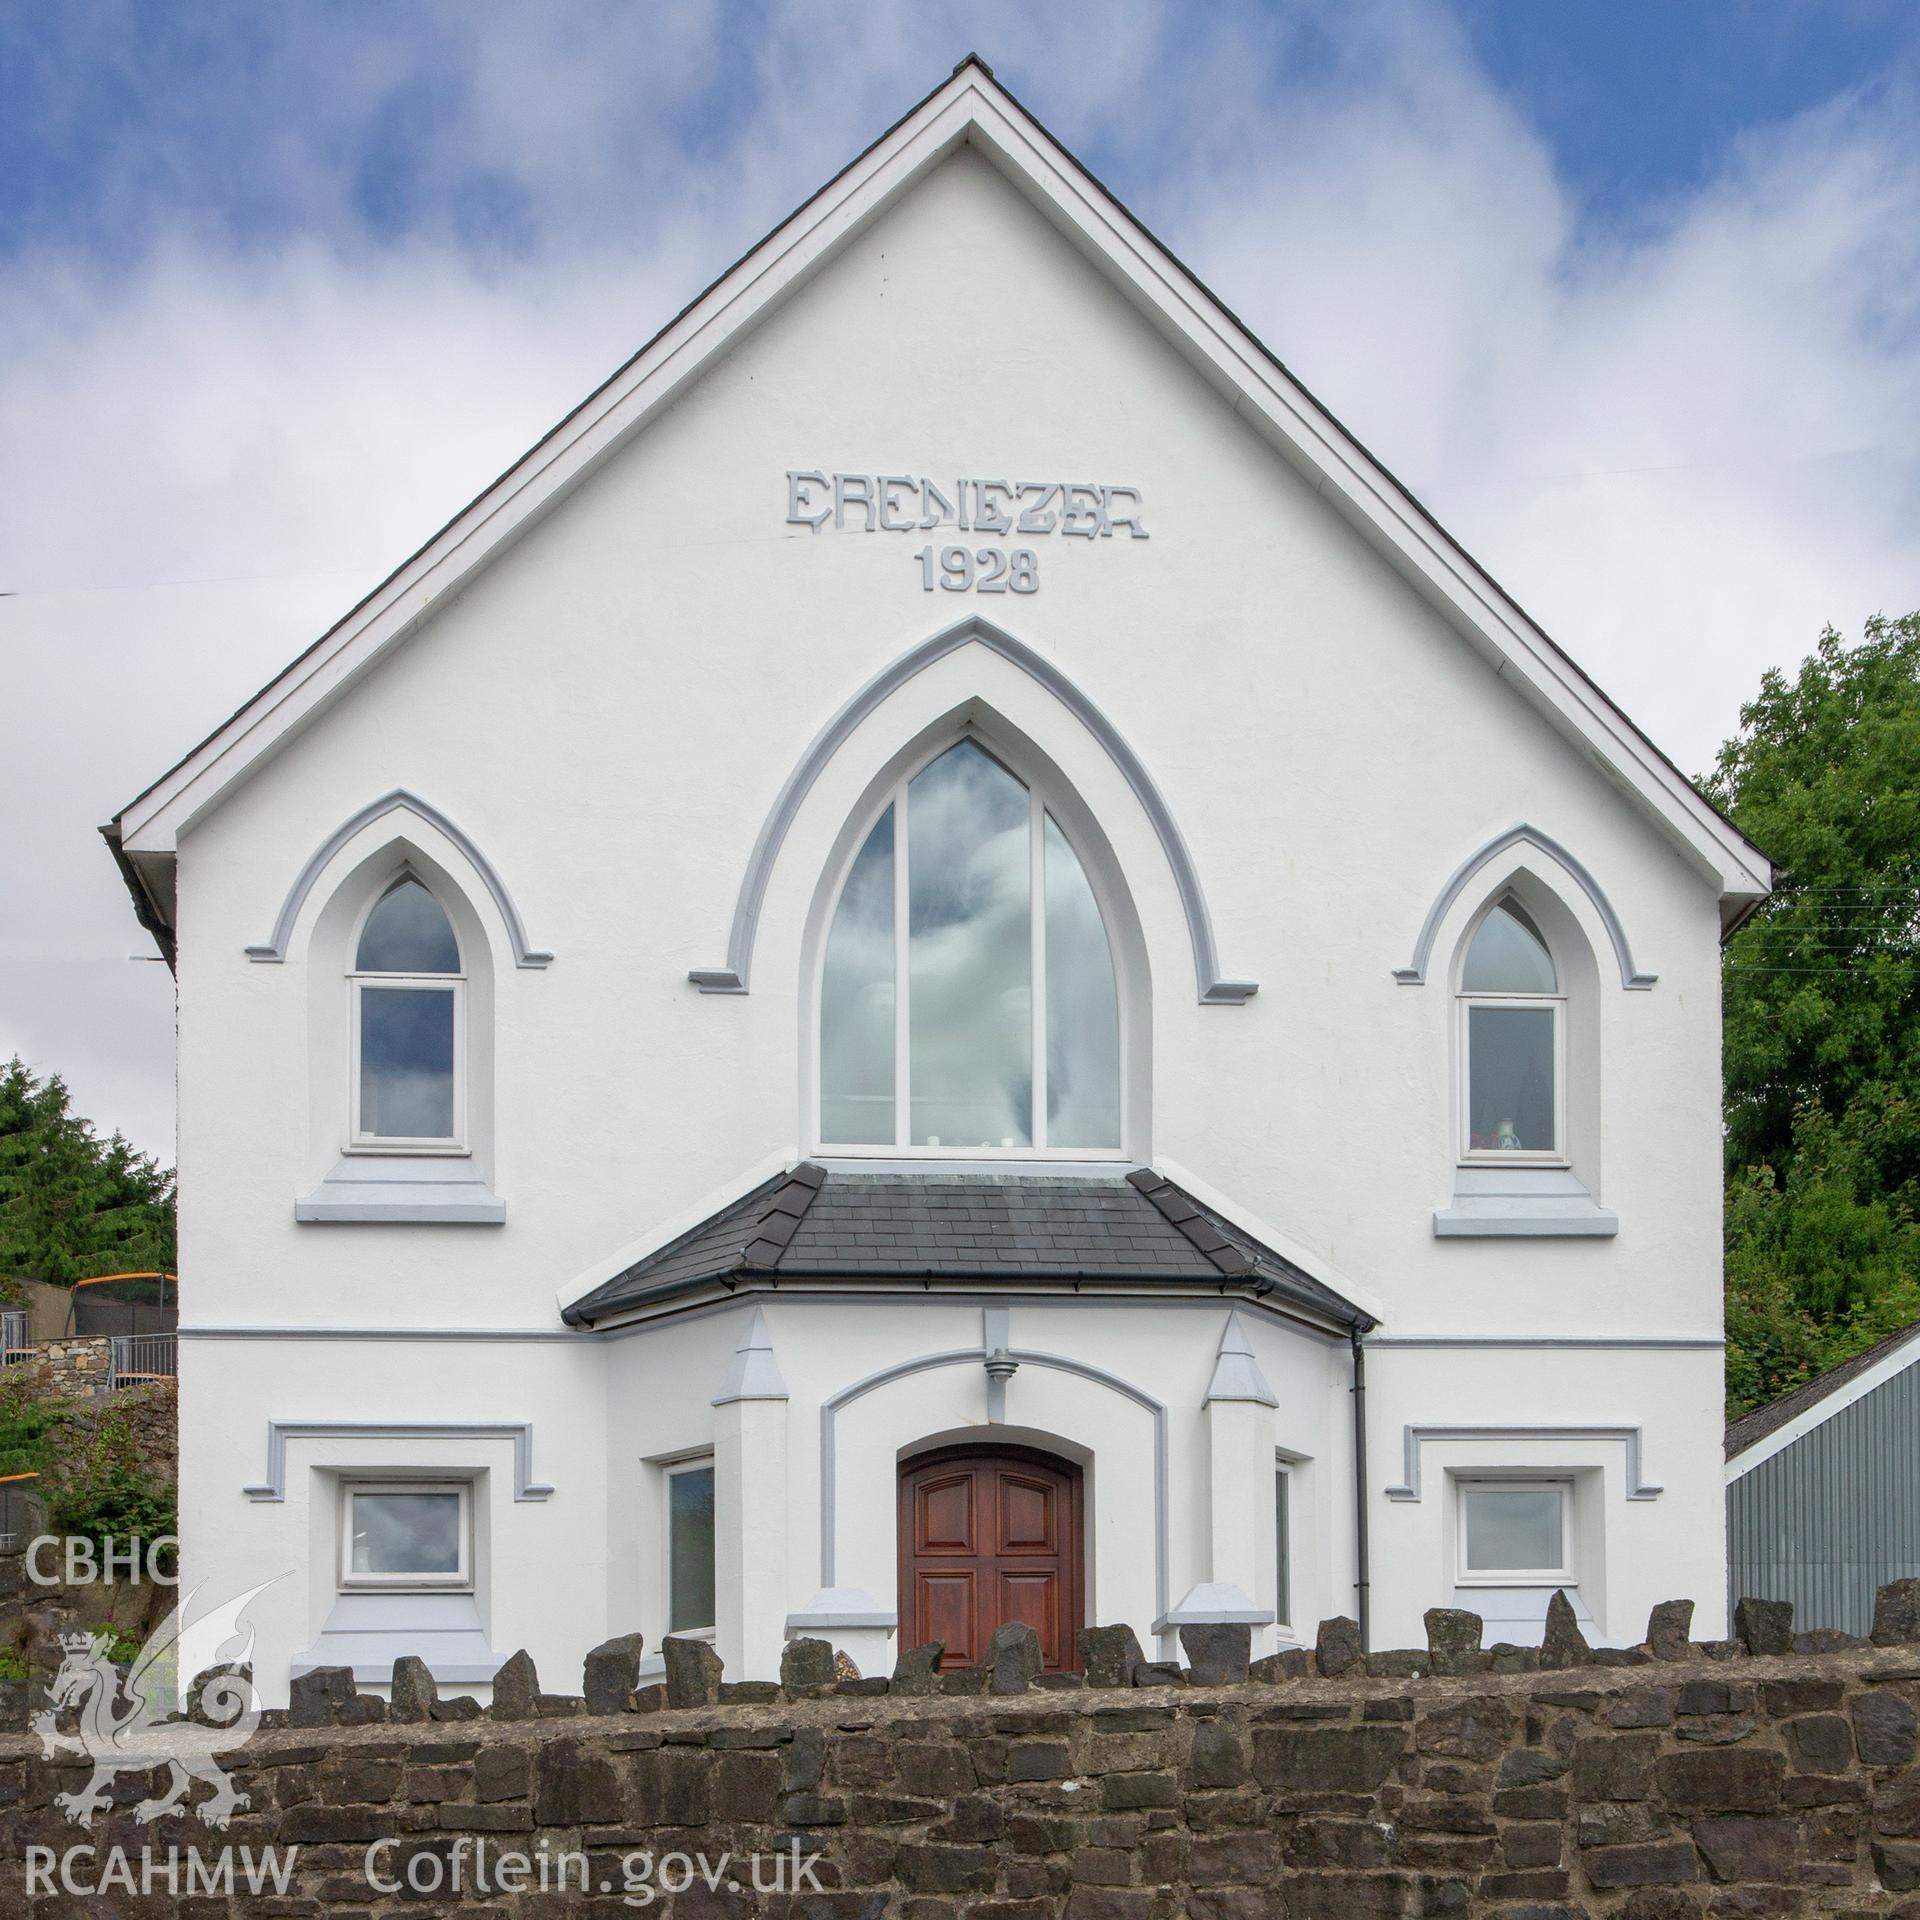 Colour photograph showing front elevation and entrance of Ebeneser Welsh Independent Chapel, Stop-and-Call, Goodwick. Photographed by Richard Barrett on 22nd June 2018.